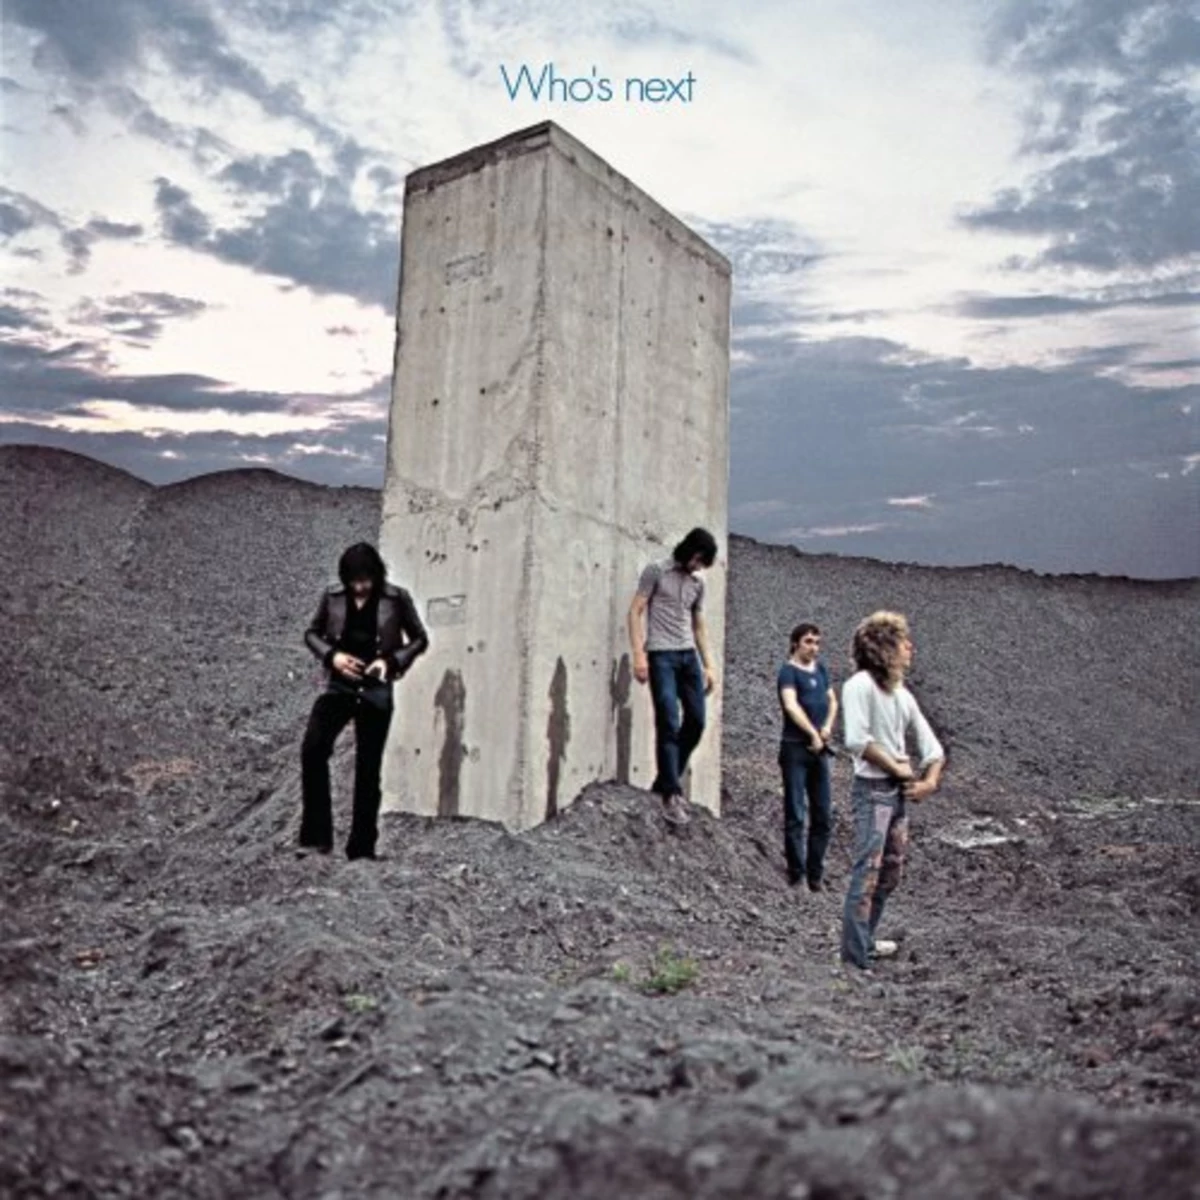 Topless Beach Fisting - The Who's 'Who's Next' Album Compiled from Failed Rock Opera